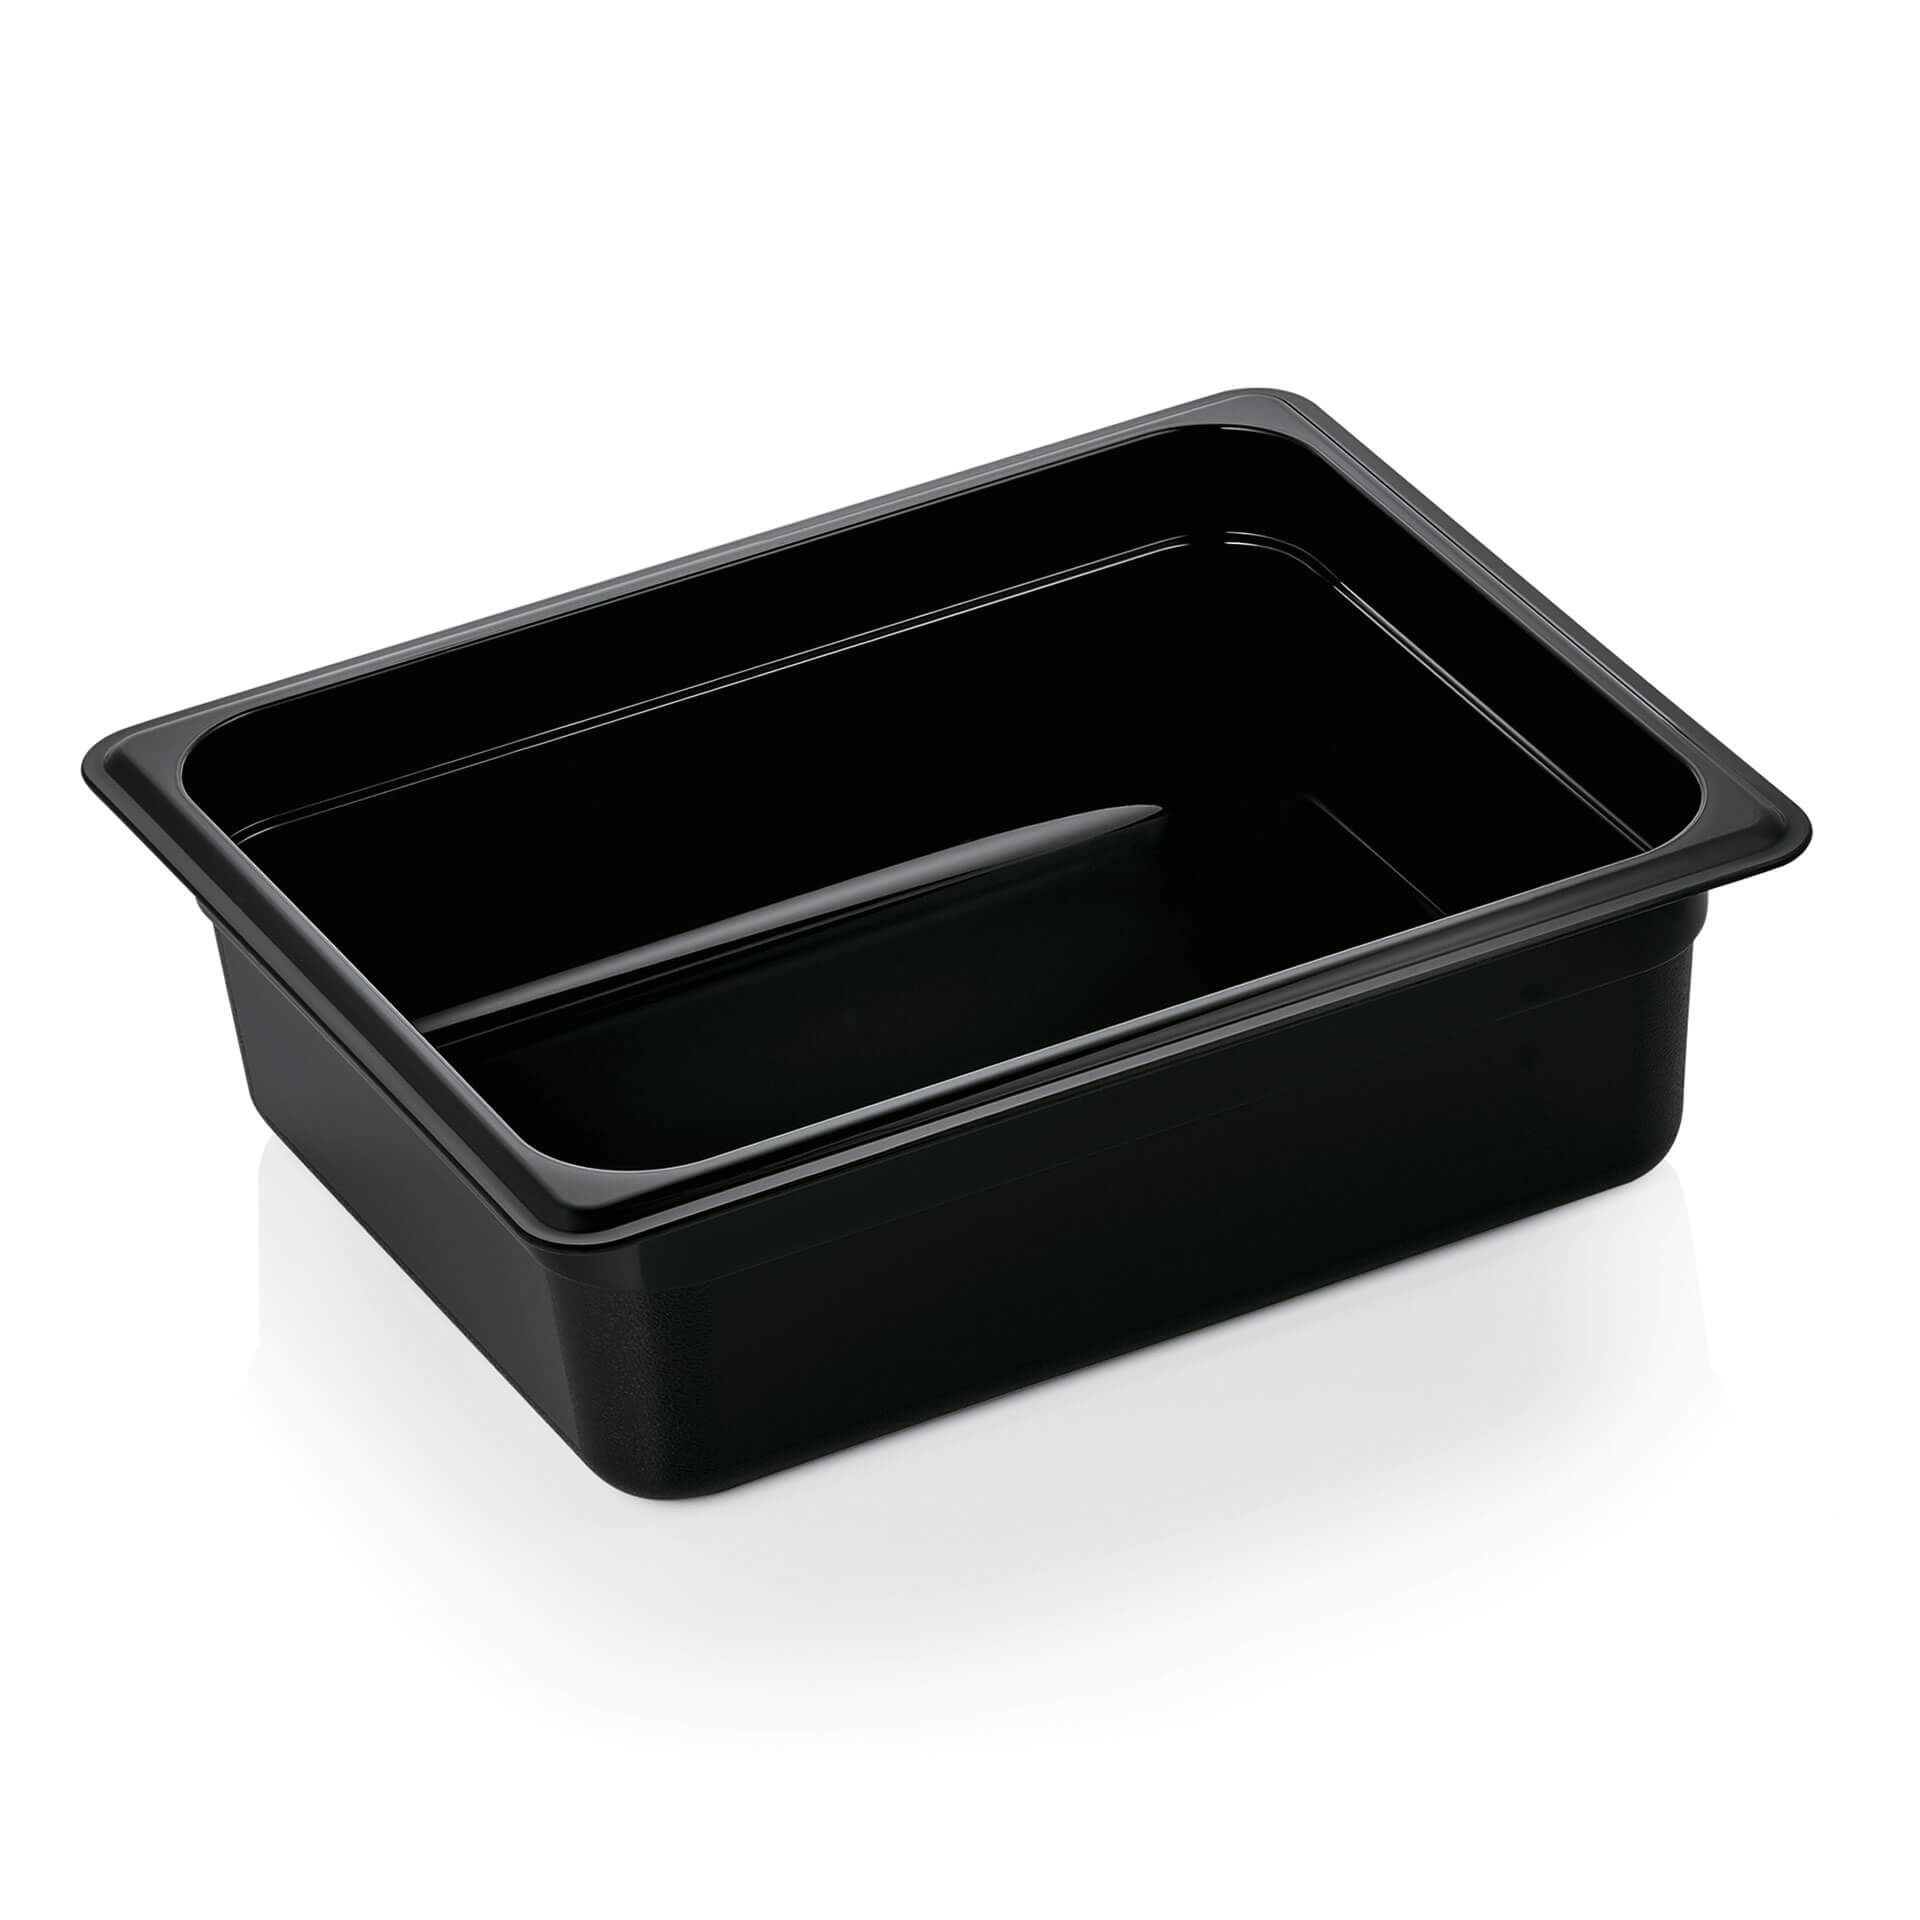 Gastronorm container 100mm depth - PC black (GN 1/2)